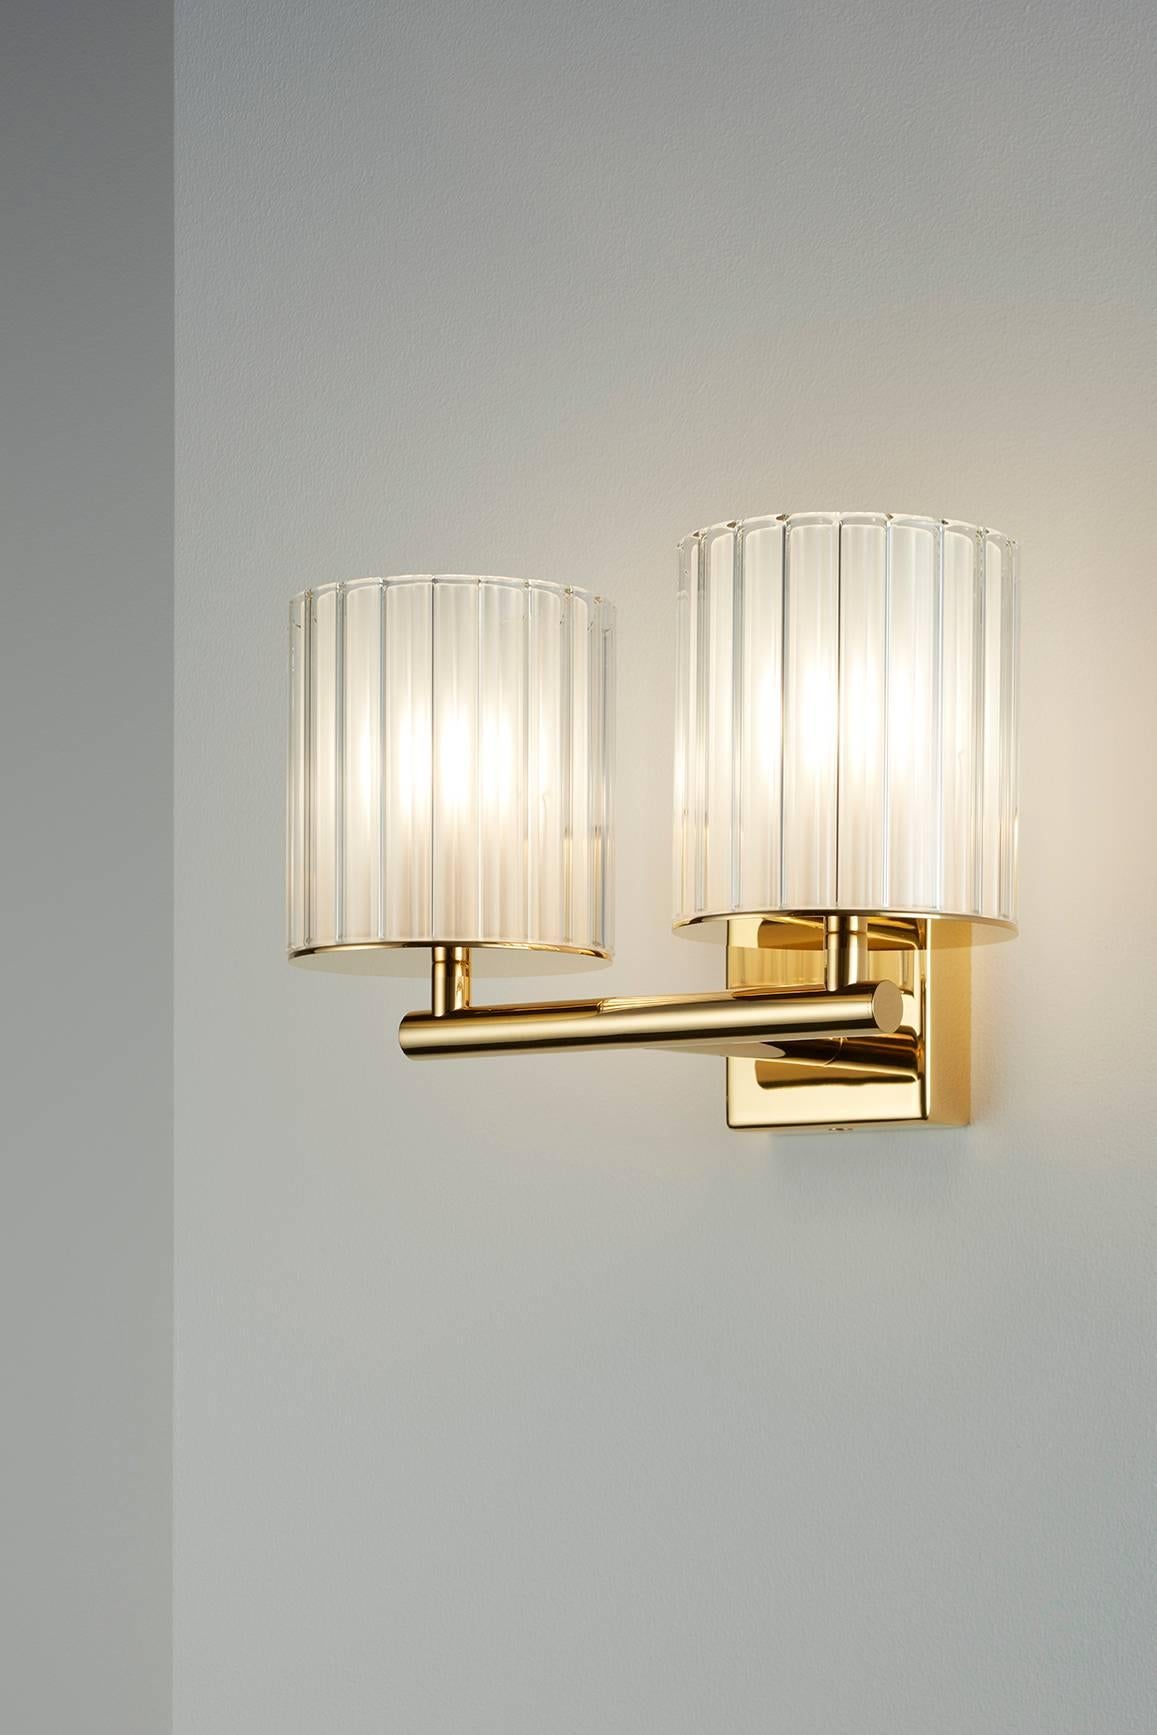 Designed by Tom Kirk, the Flute Wall Light Double extends the functions of its single counterpart, increasing your options as well as delivering twice the light output. The fixture is available in a range of popular finishes including polished gold,